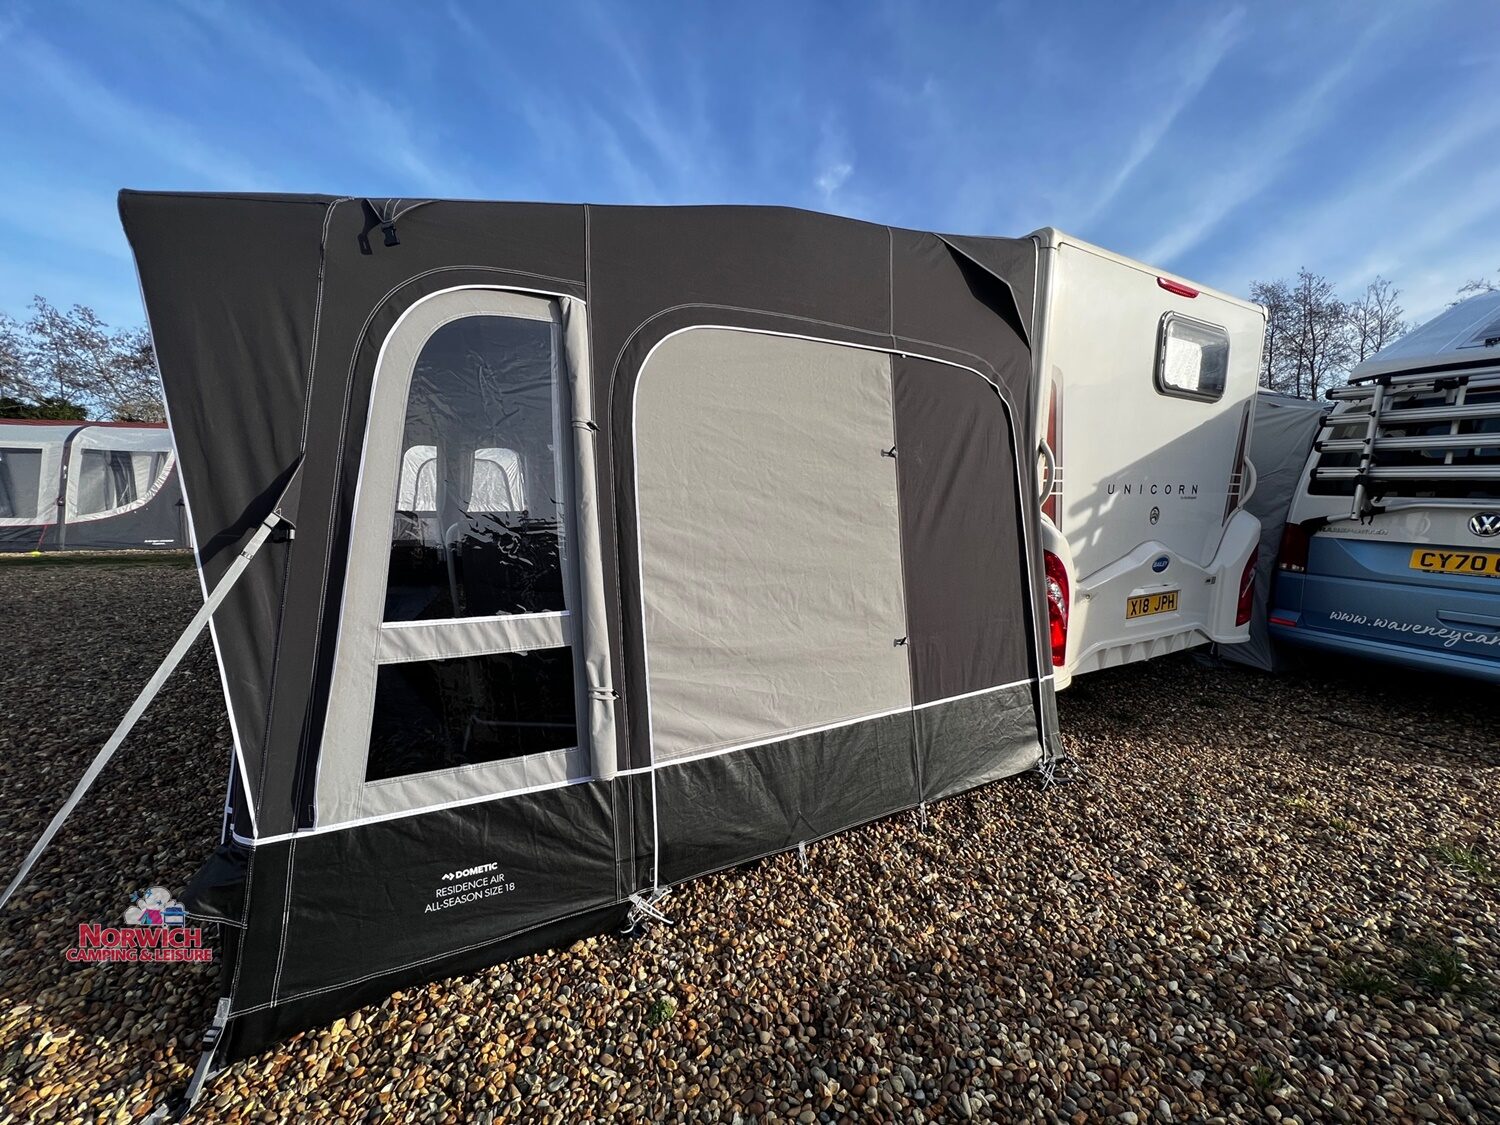 Dometic Residence All Season Awning On A Bailey Caravan At Norwich Camping 11